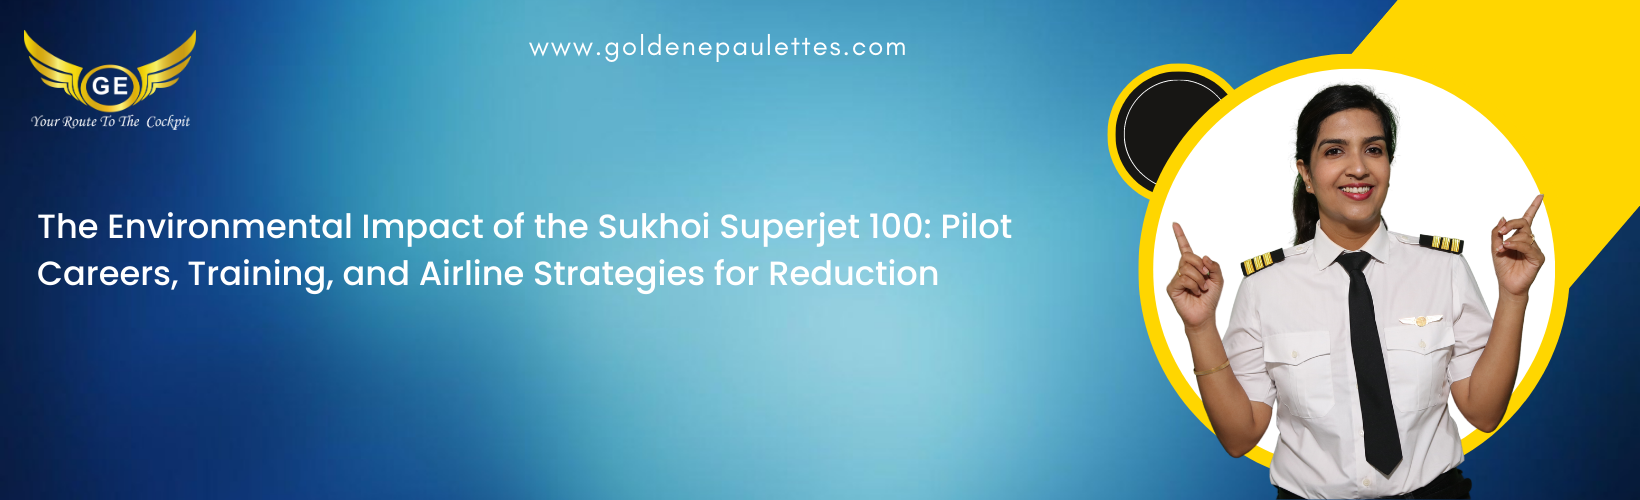 The Sukhoi Superjet 100 and the Environment